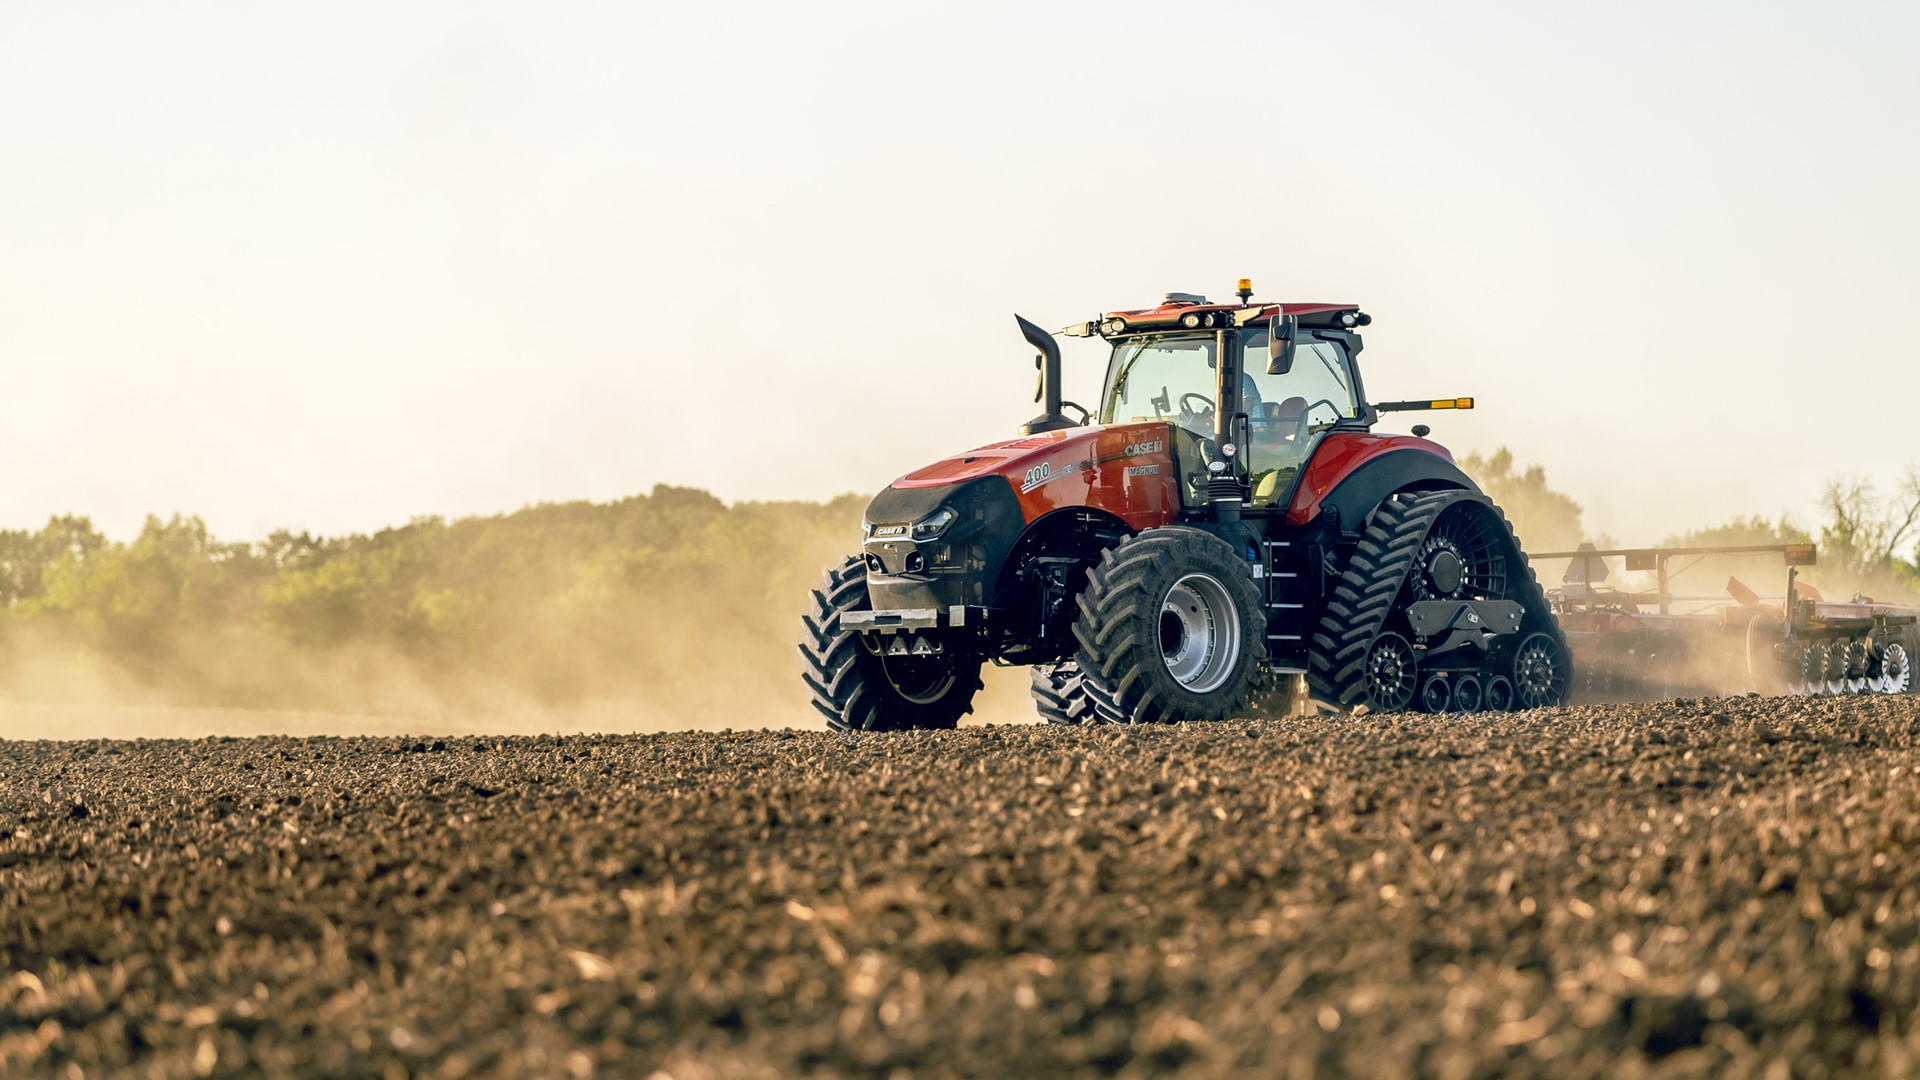 New AFS Connect™ Magnum™ 400 tractors from Case IH provide connectivity, visibility and increased power